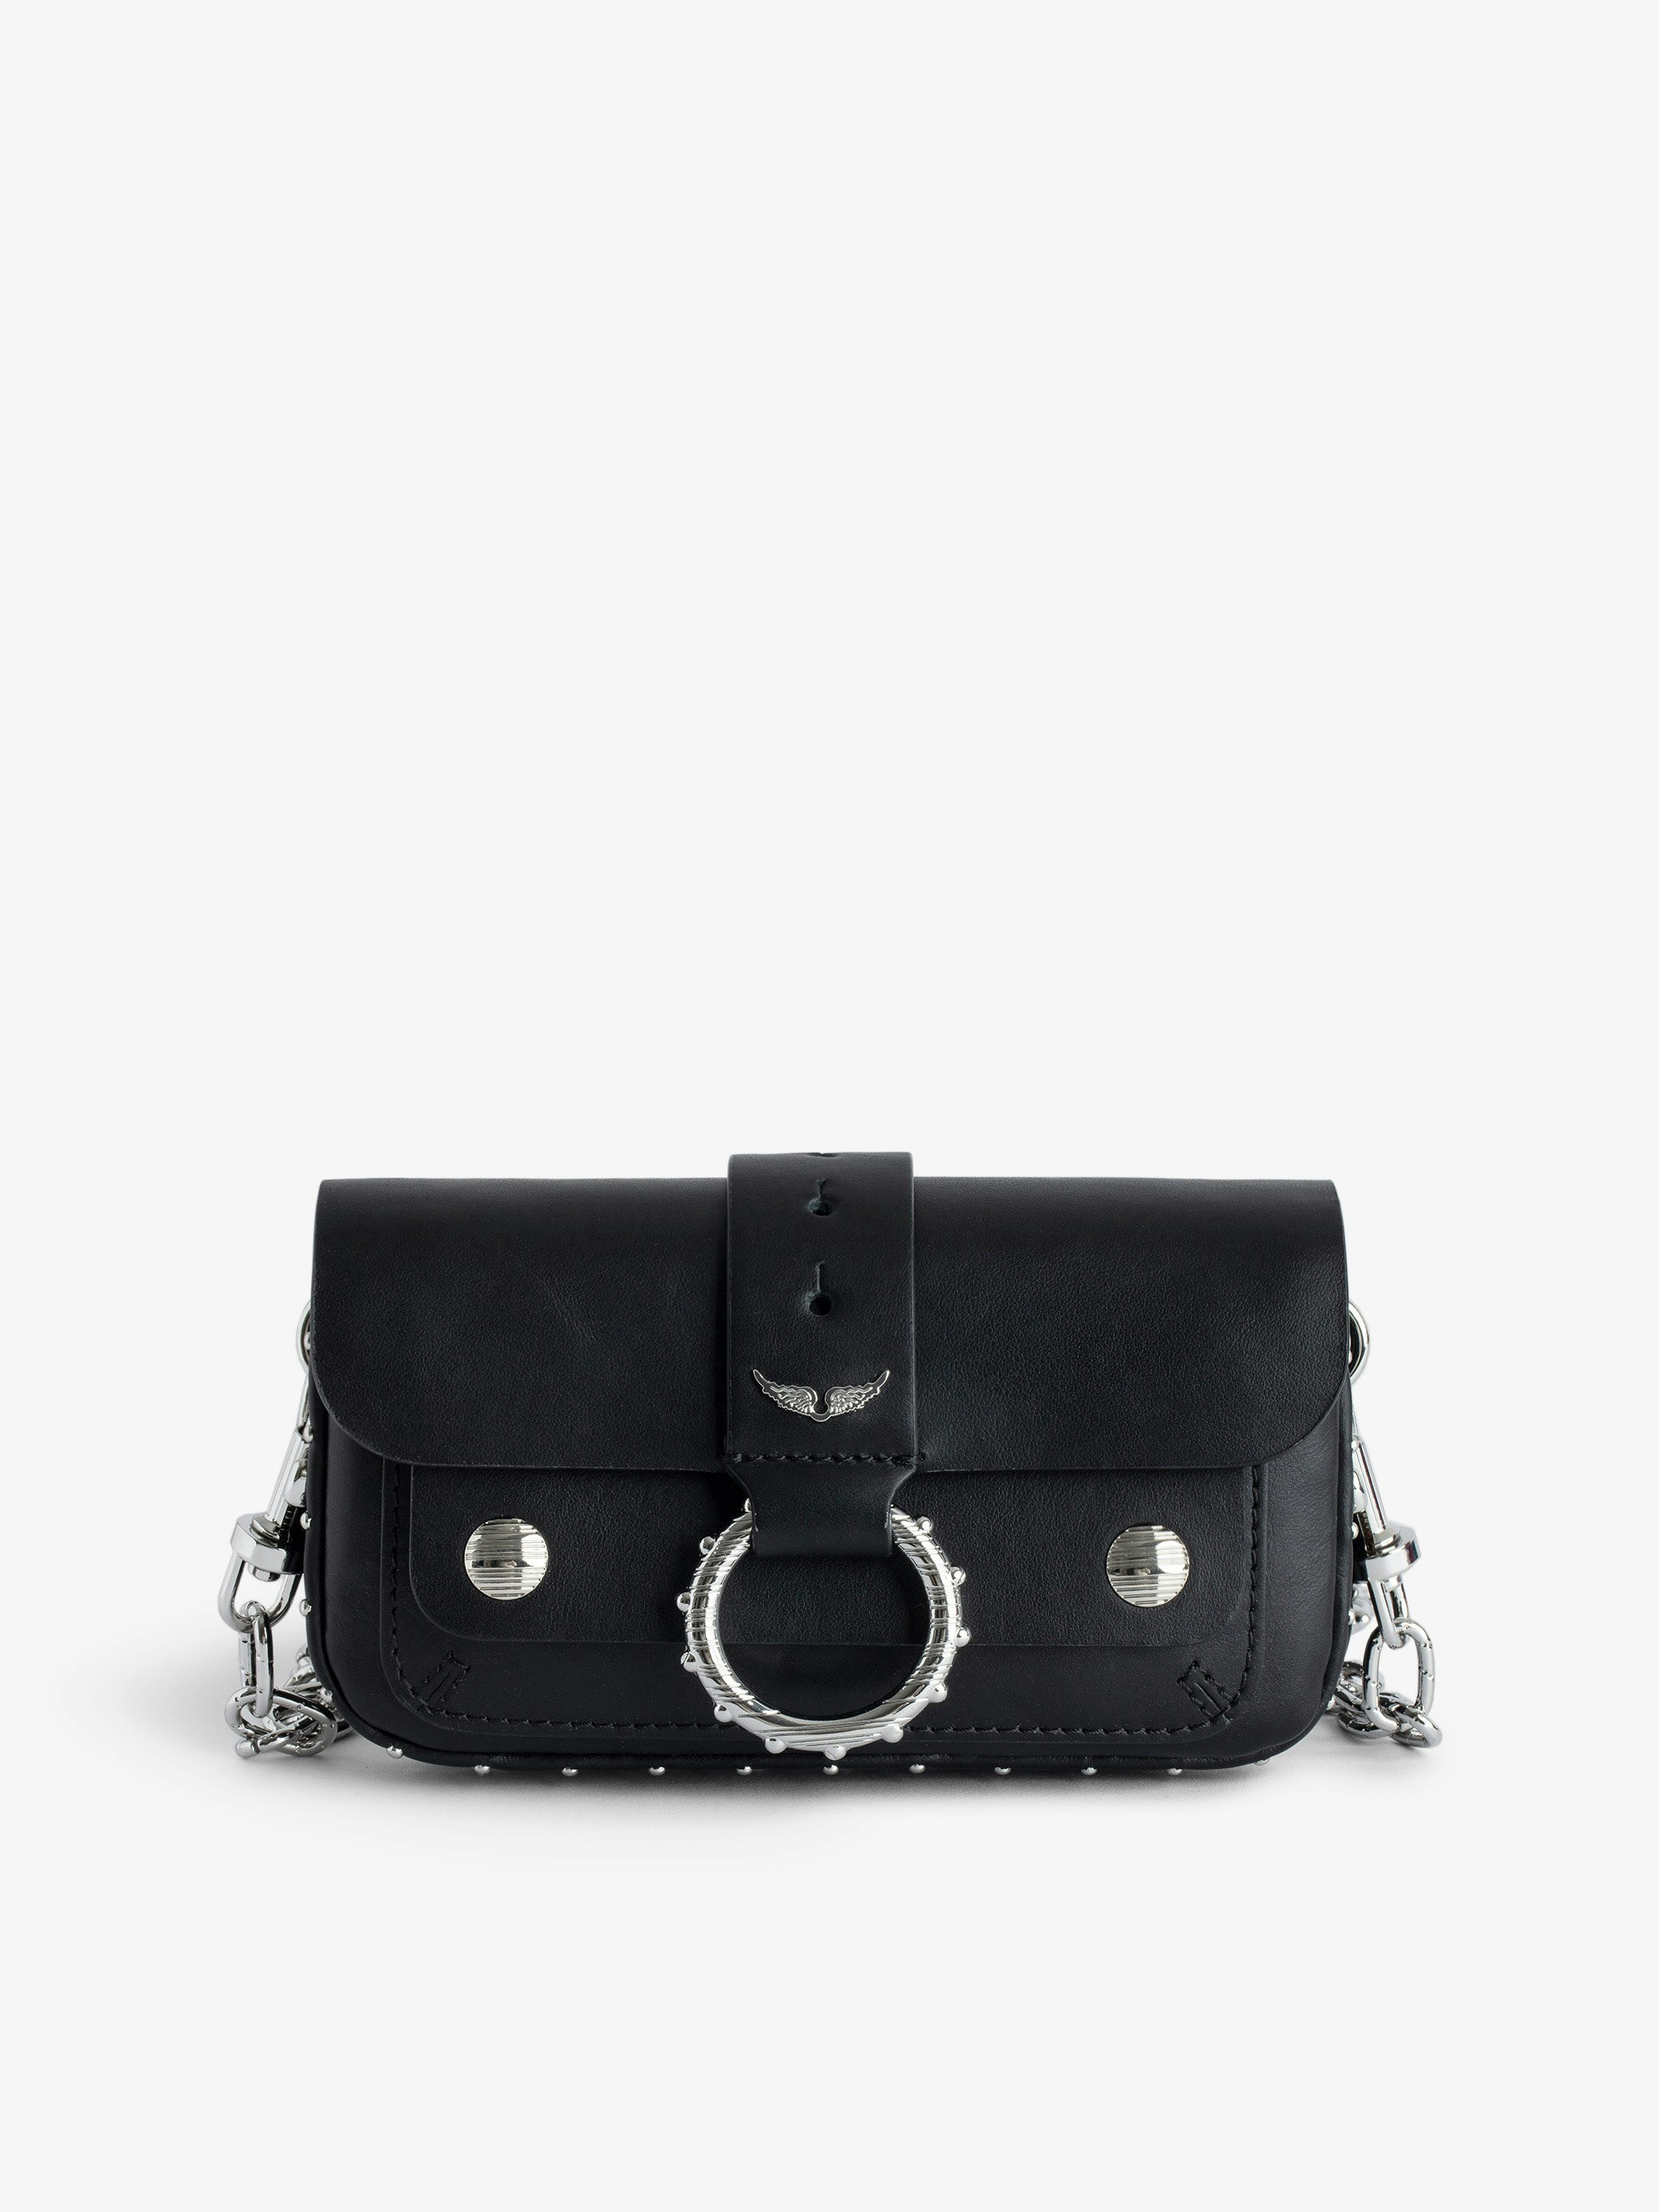 Kate Wallet Bag - Designed by Kate Moss for Zadig&Voltaire.  Black smooth leather mini bag with ring and metal chain.